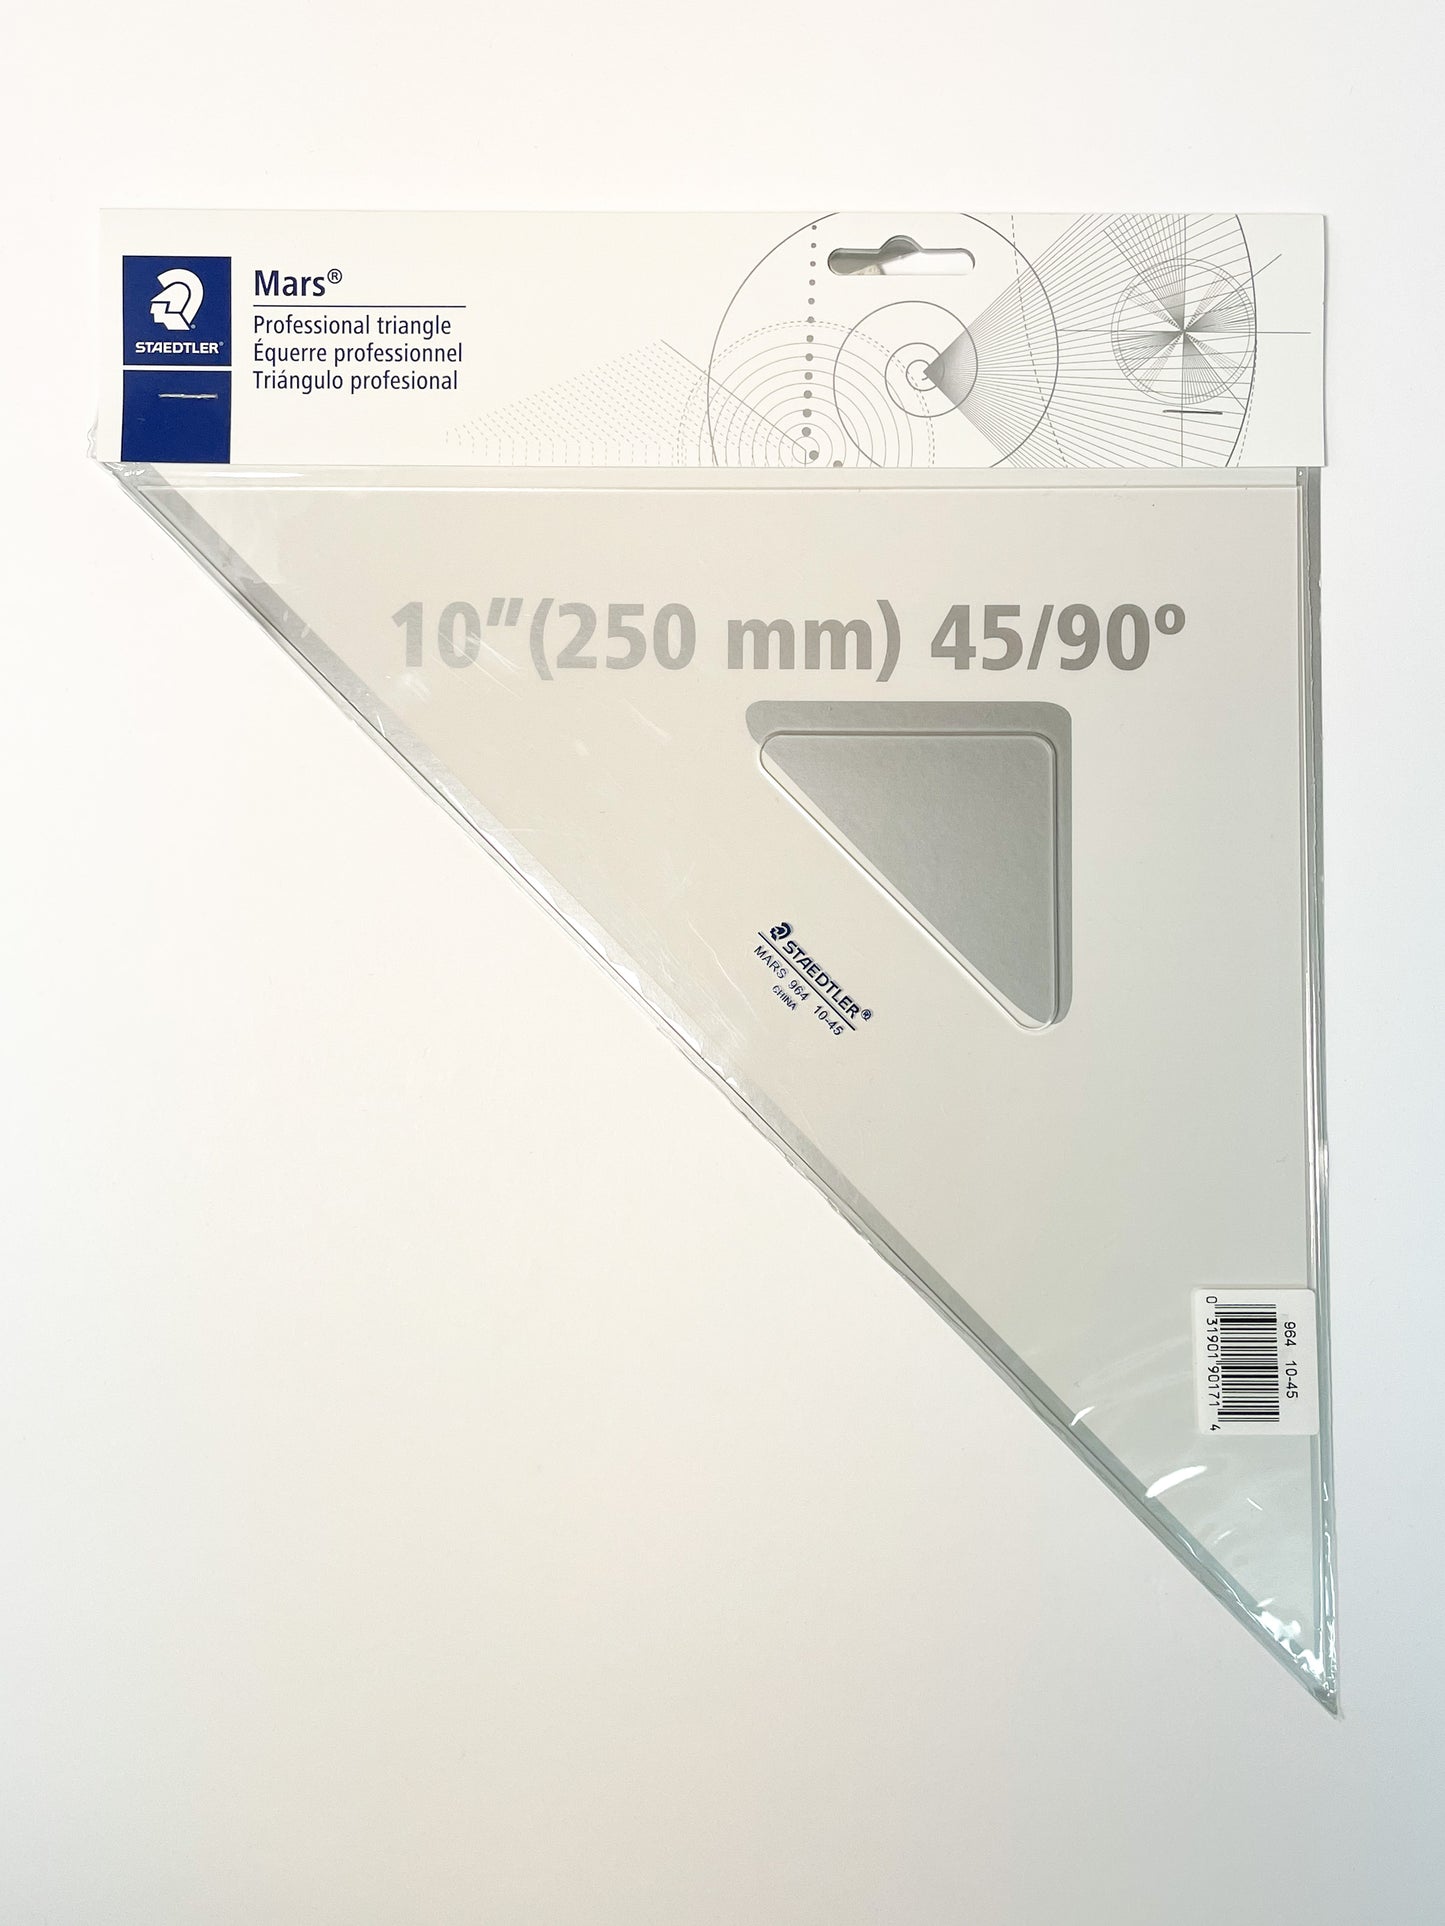 Staedtler Mars® Professional Triangle - 10" (250mm) 45/90°